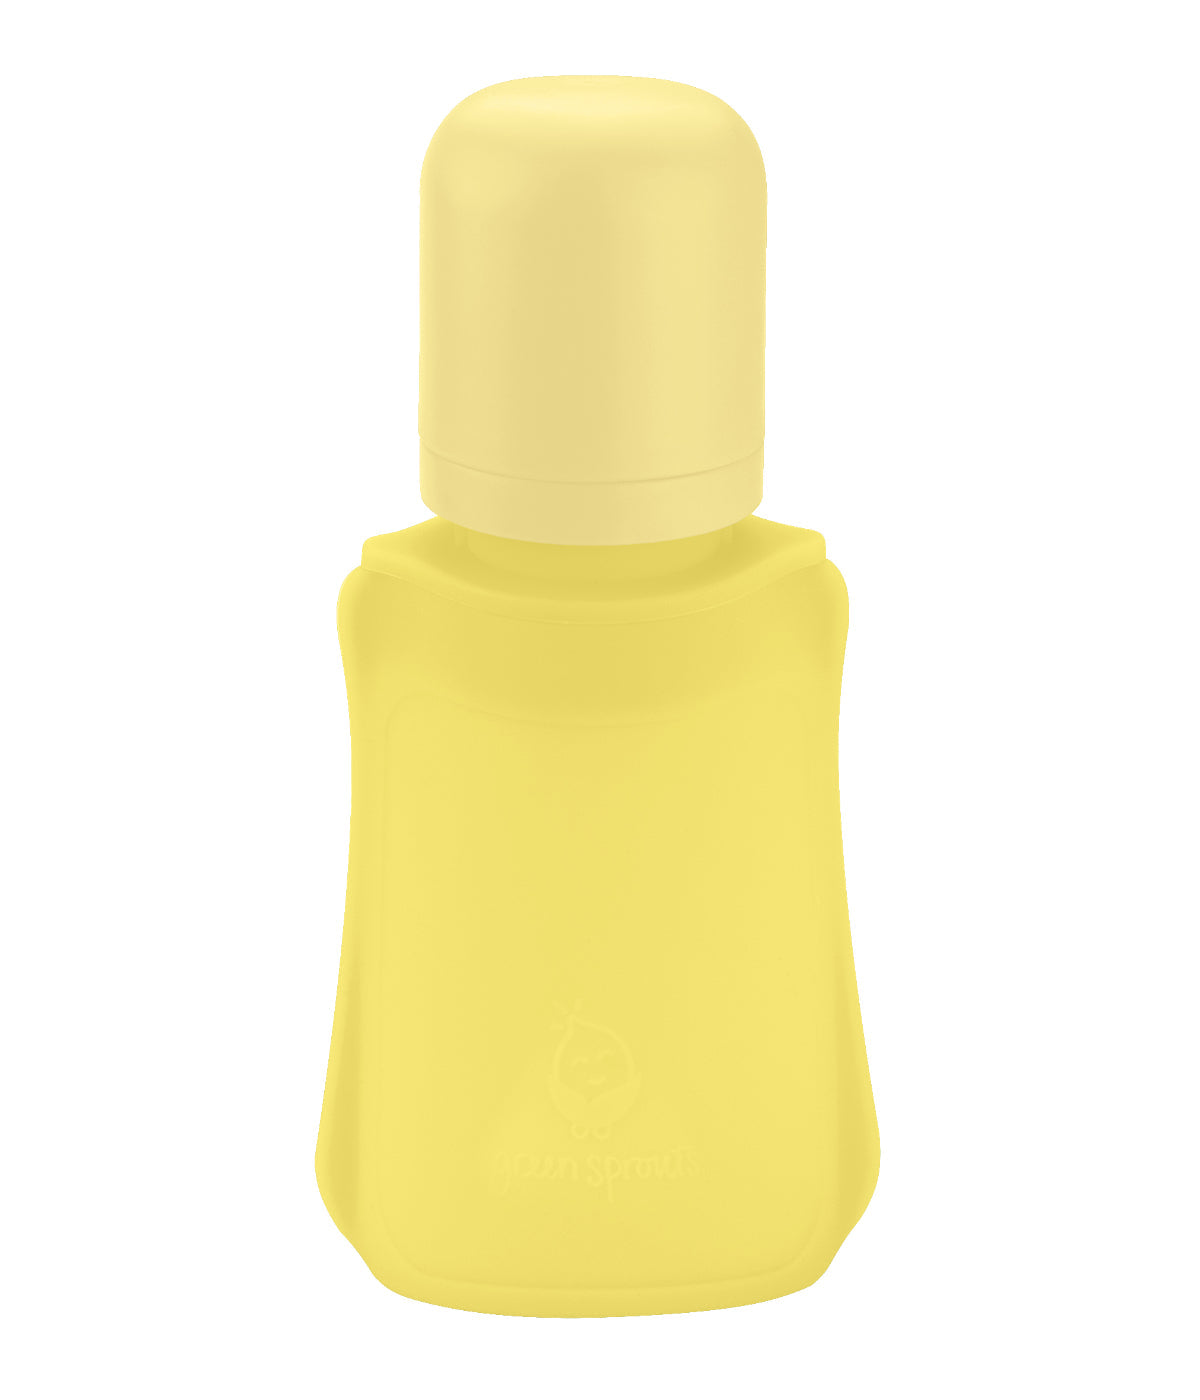 Sprout Ware Baby Pocket made from Silicone and Plants 8oz Yellow